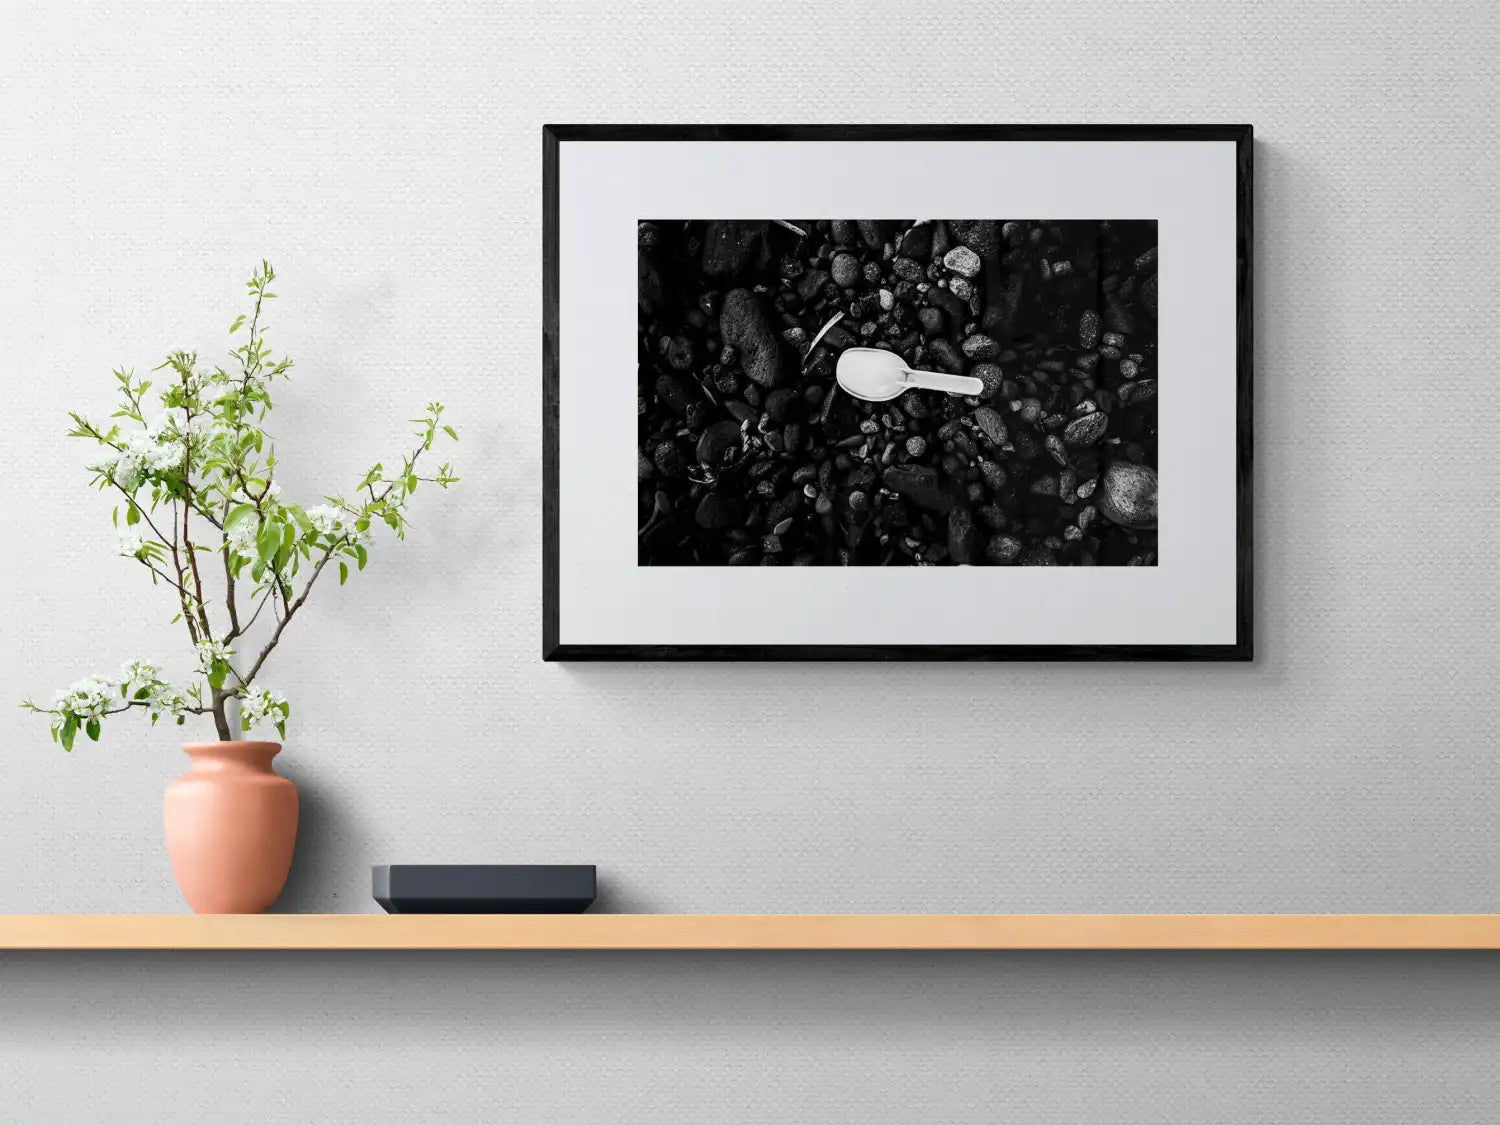 Black Pebbles and Shovel | Santorini | Chorōs | Black-and-white wall art photography from Greece